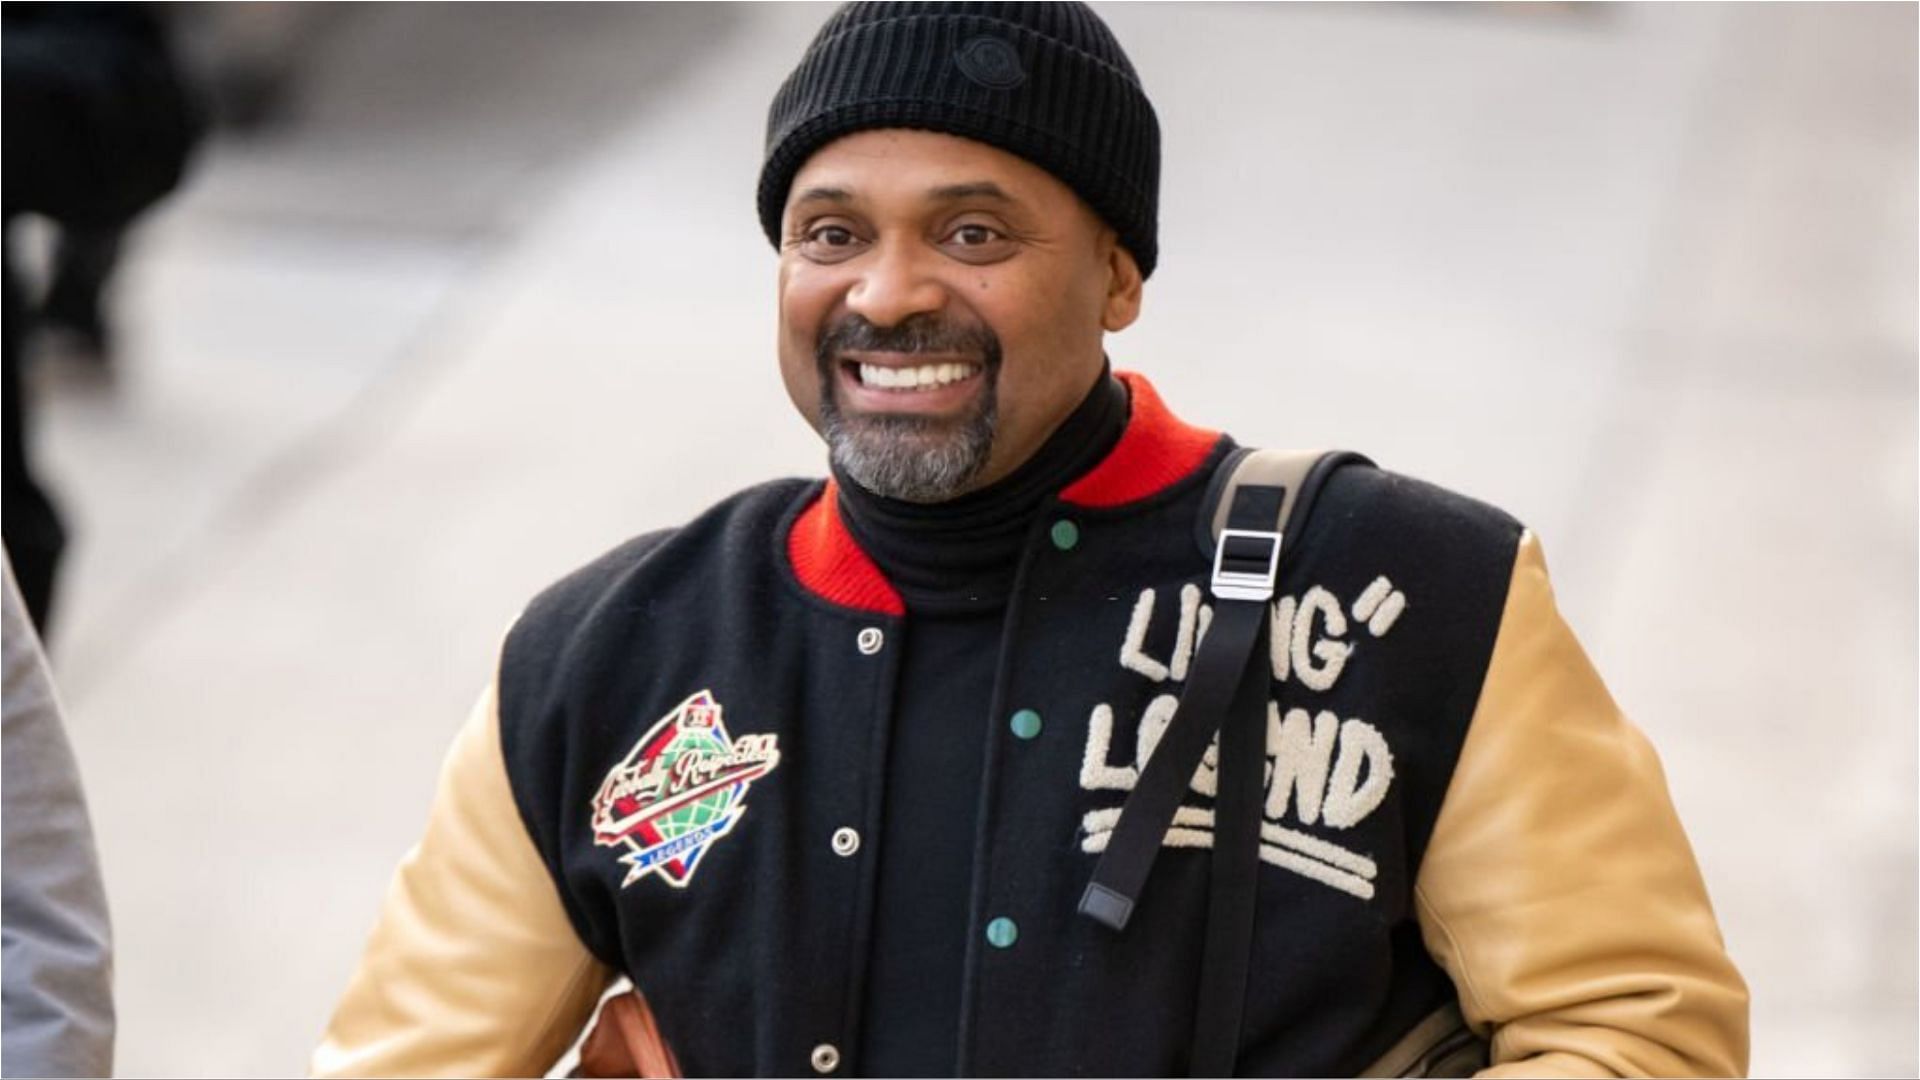 Mike Epps is currently under investigation after a weapon and ammunition were discovered in his possession (Image via RB/Bauer-Griffin/Getty Images)